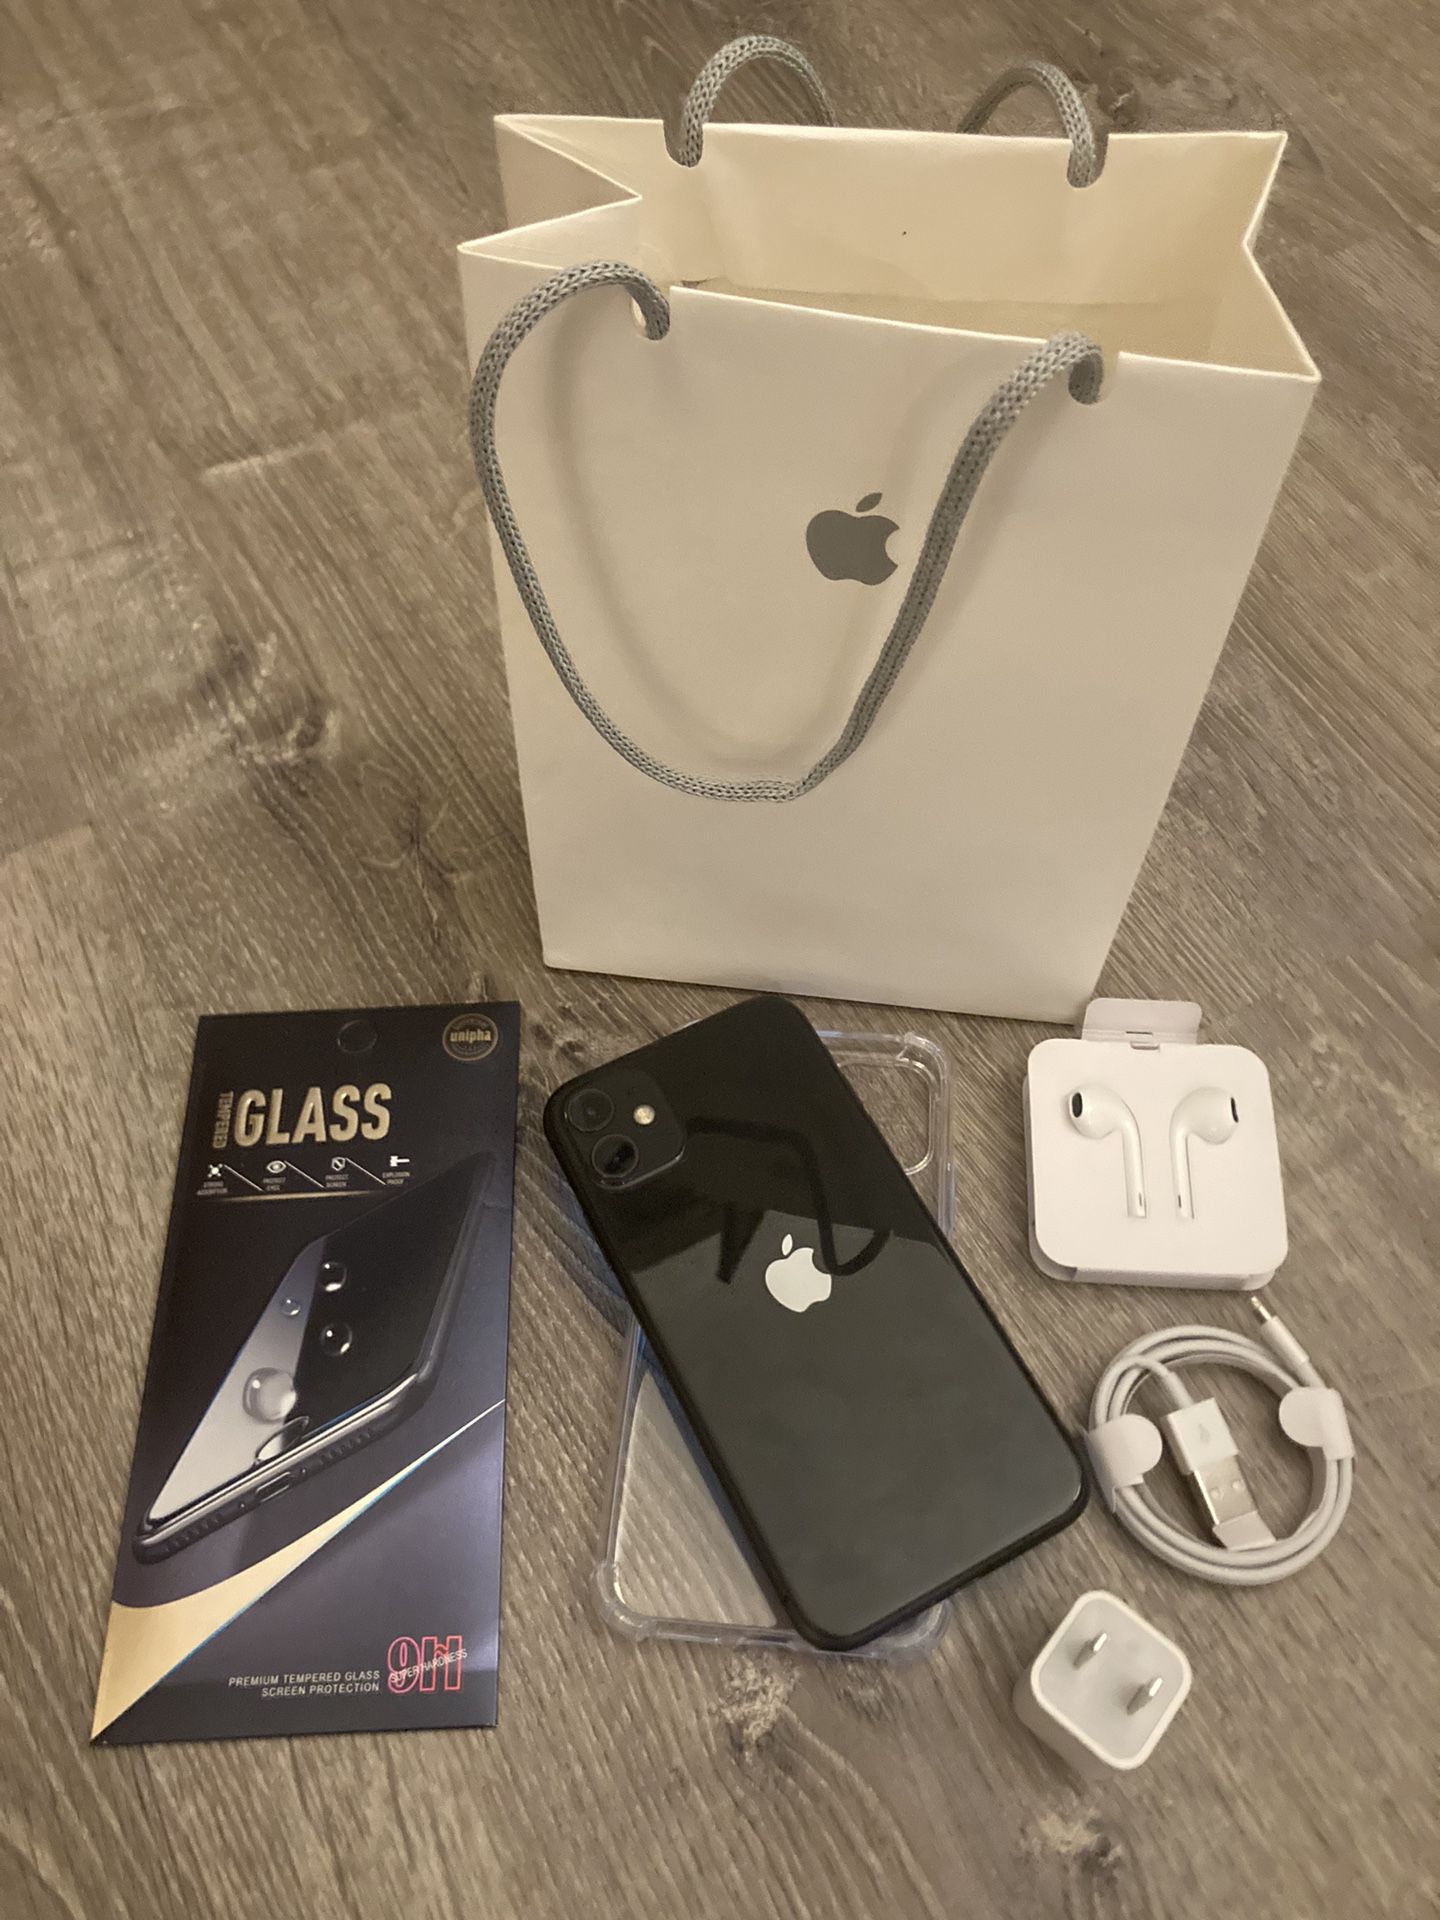 IPHONE 11 UNLOCKED FOR ANY CARRIER COMPANY & ANY COUNTRY 64GB